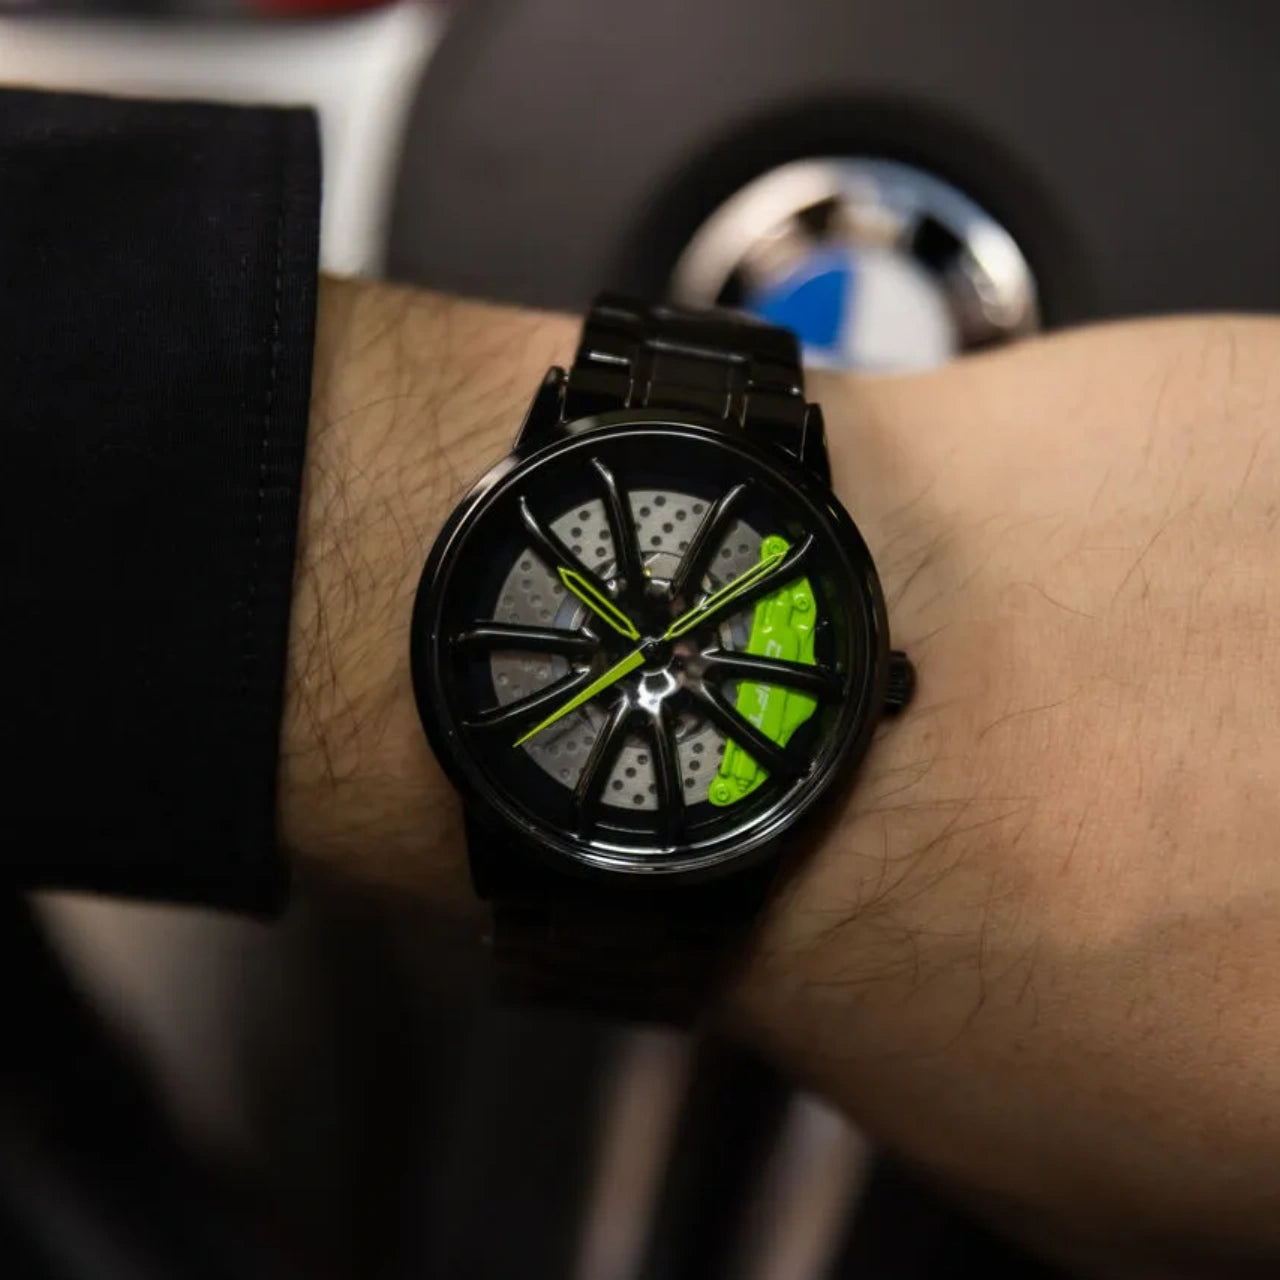 Illuminate your automotive passion with our striking green Performance GT Rim Watch! Meticulously crafted by a German startup, these precision watches are designed to captivate motorsport, tuning, and auto aficionados. Get ready to ignite your passion in style! #id_46744365465930